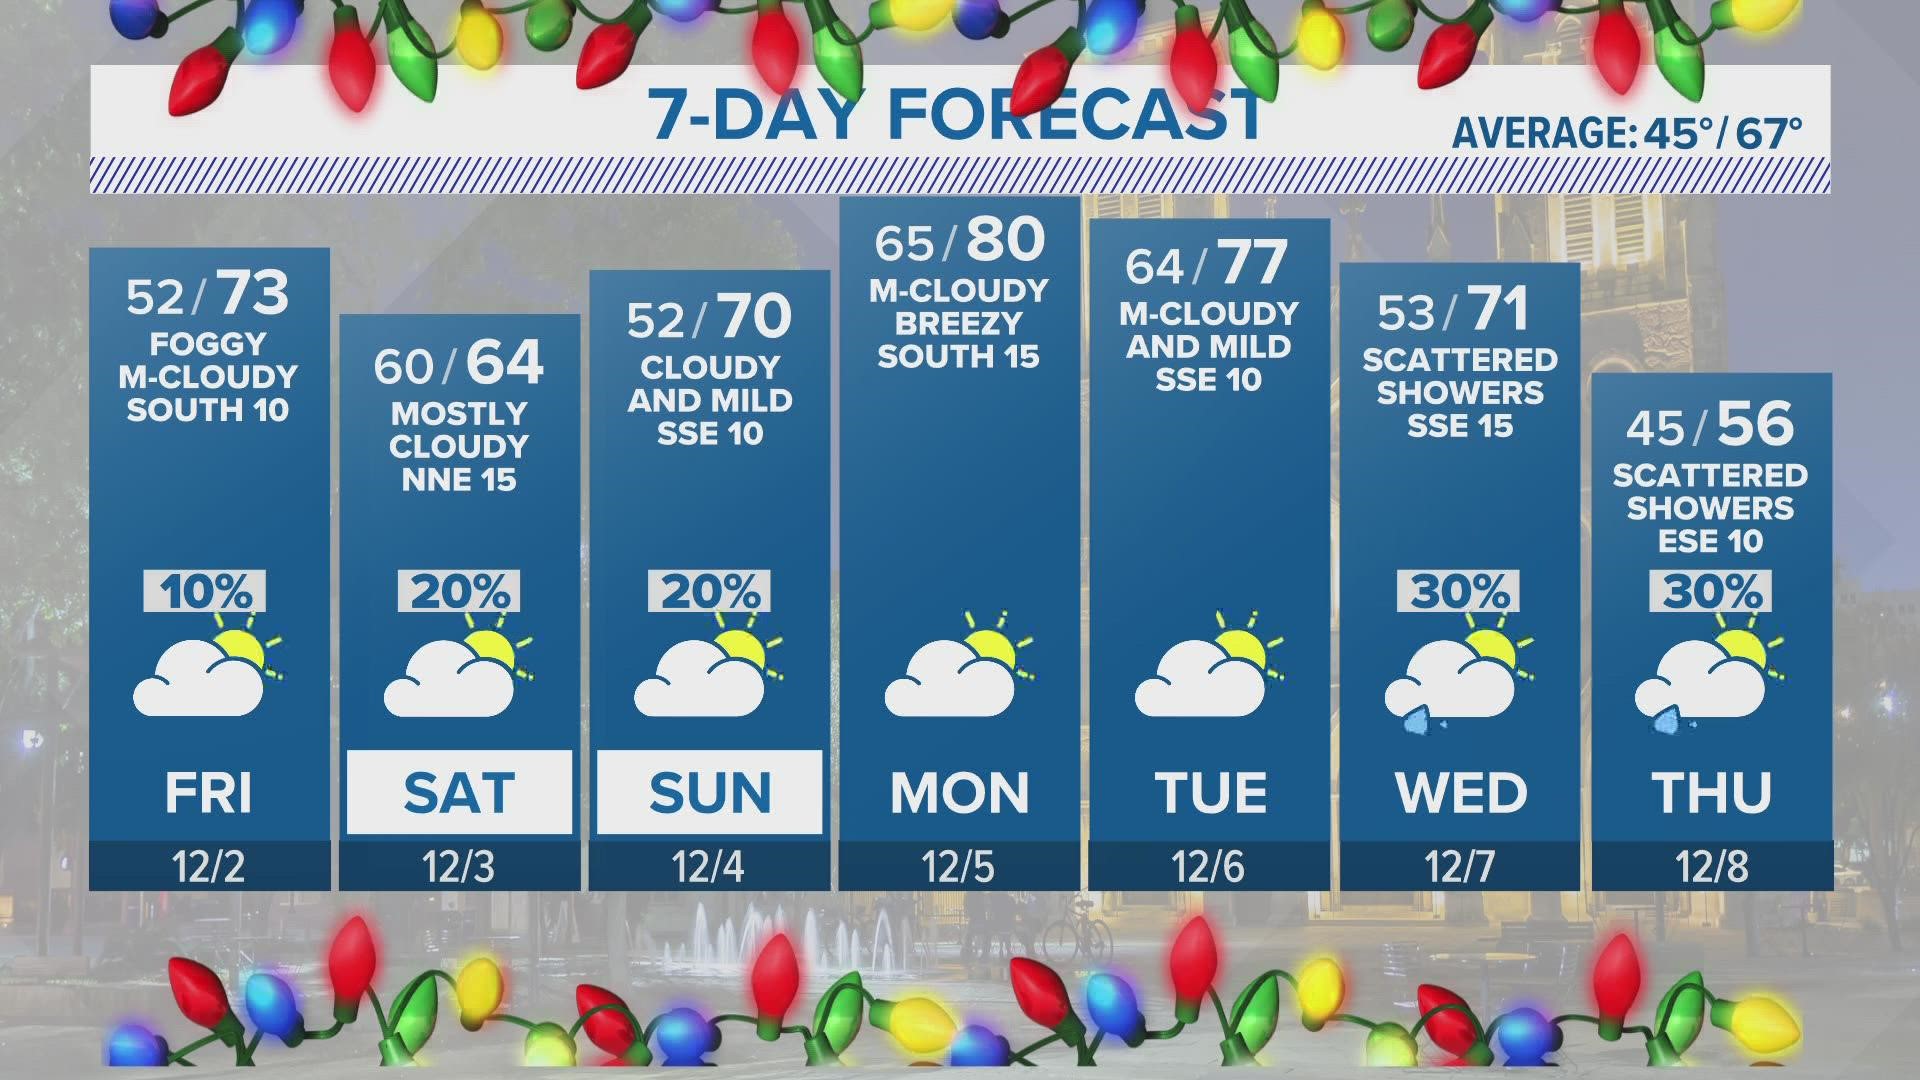 It was a foggy, chilly, damp start to December in San Antonio.